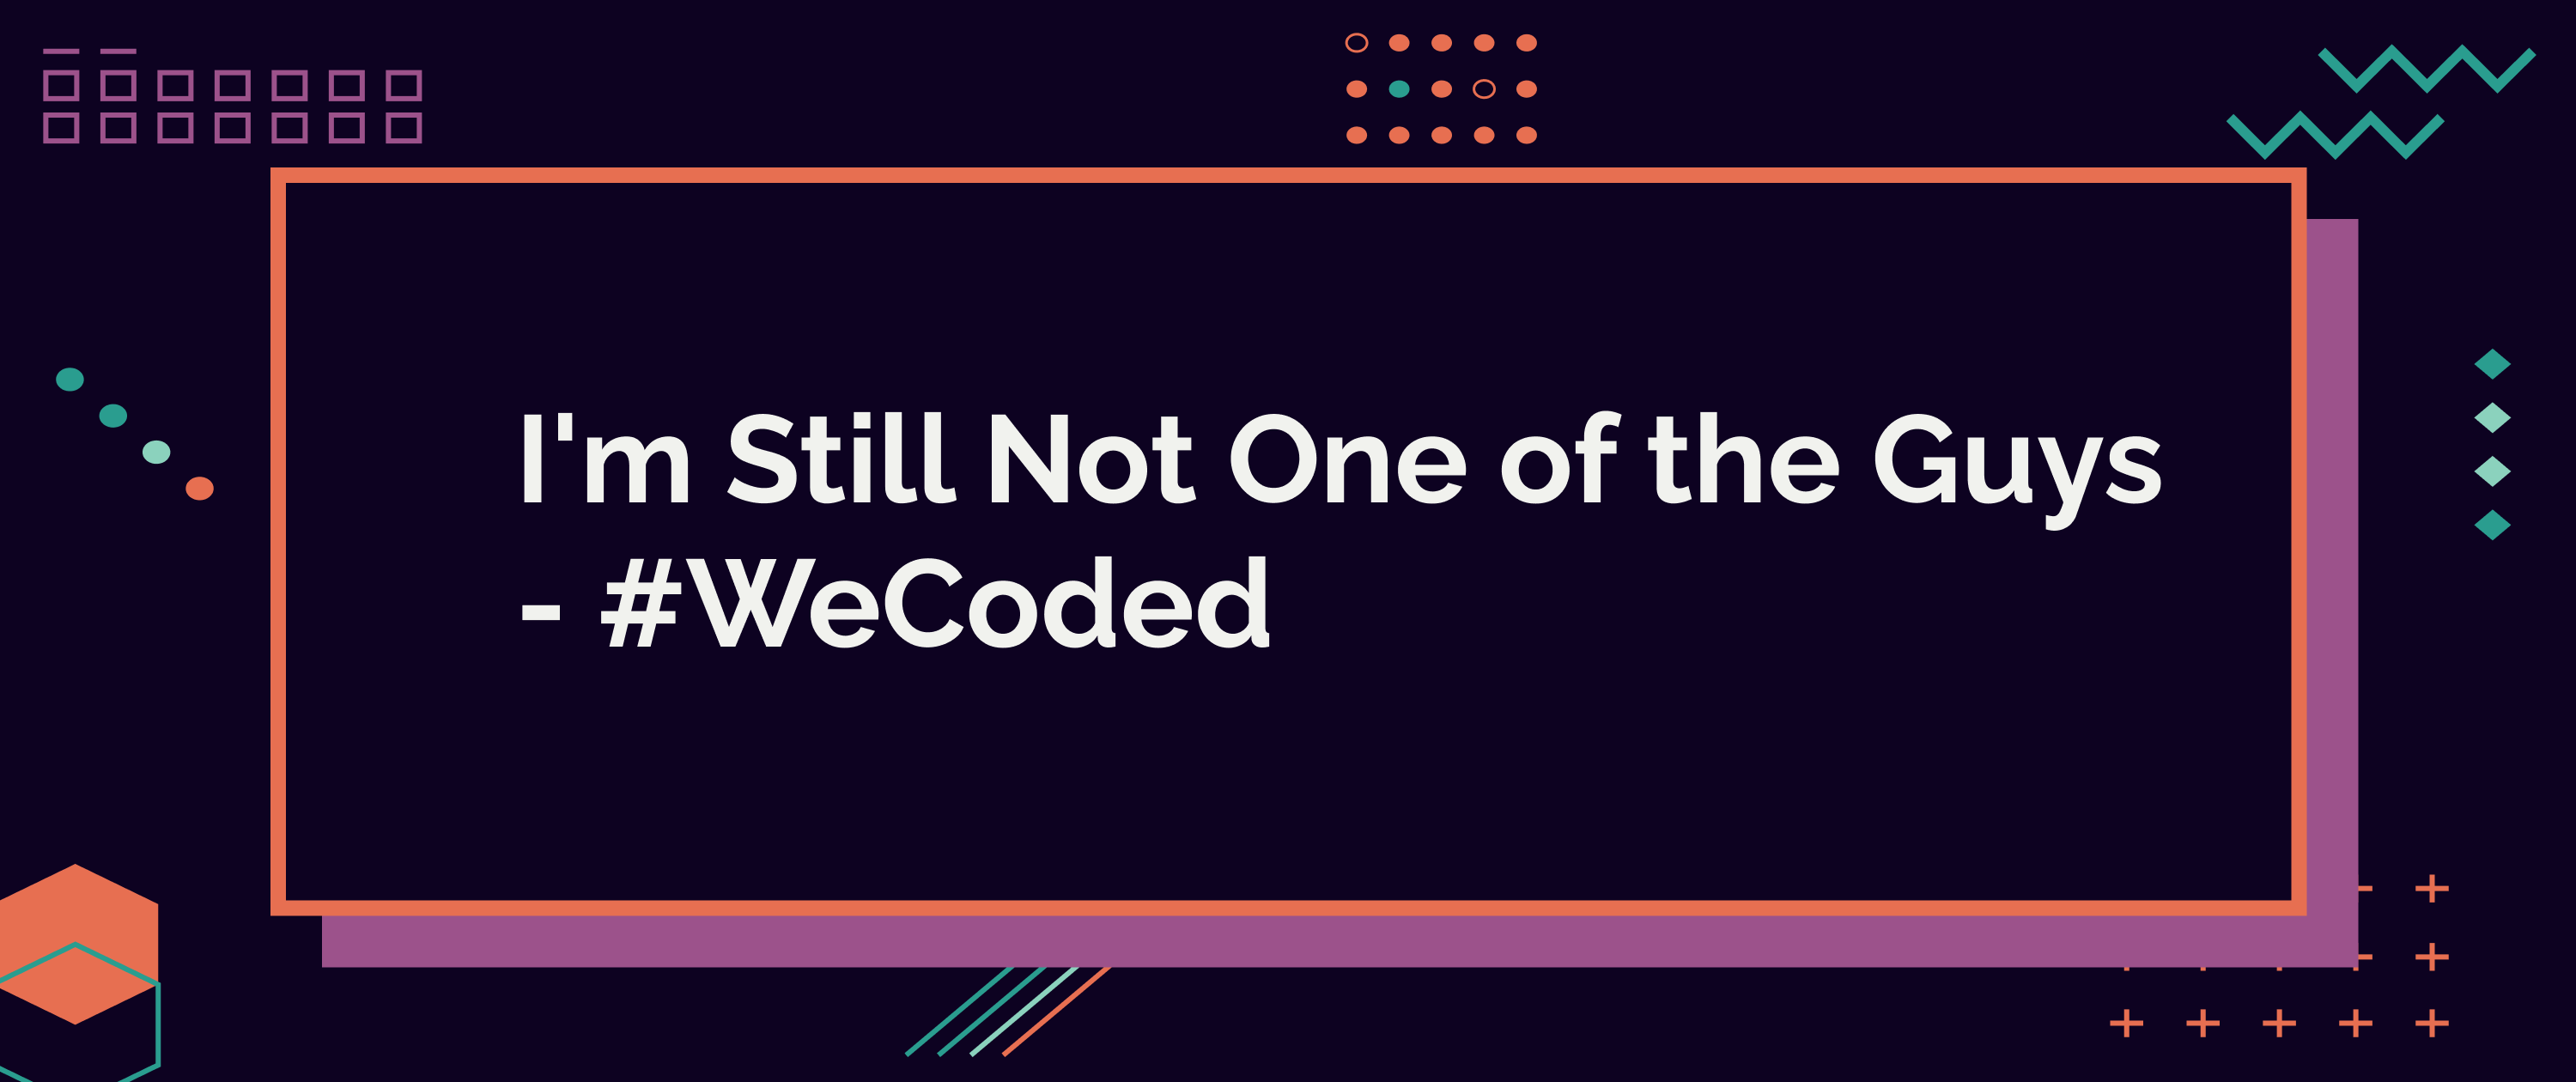 I'm Still Not One of the Guys - #WeCoded